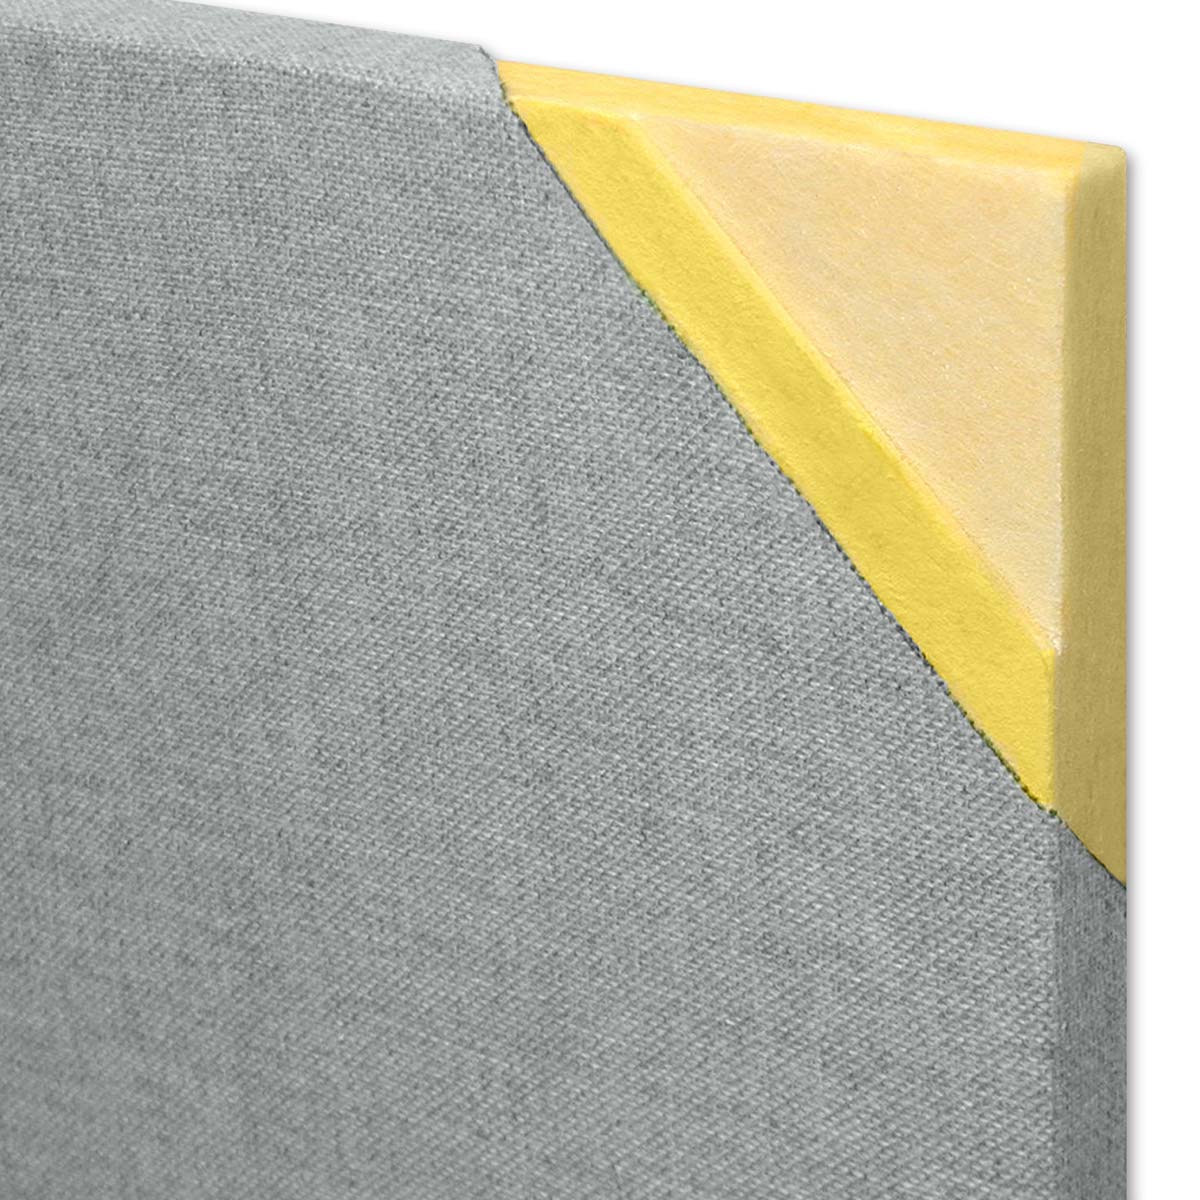 8 Interior Acoustic Panels and Their Constructive Details